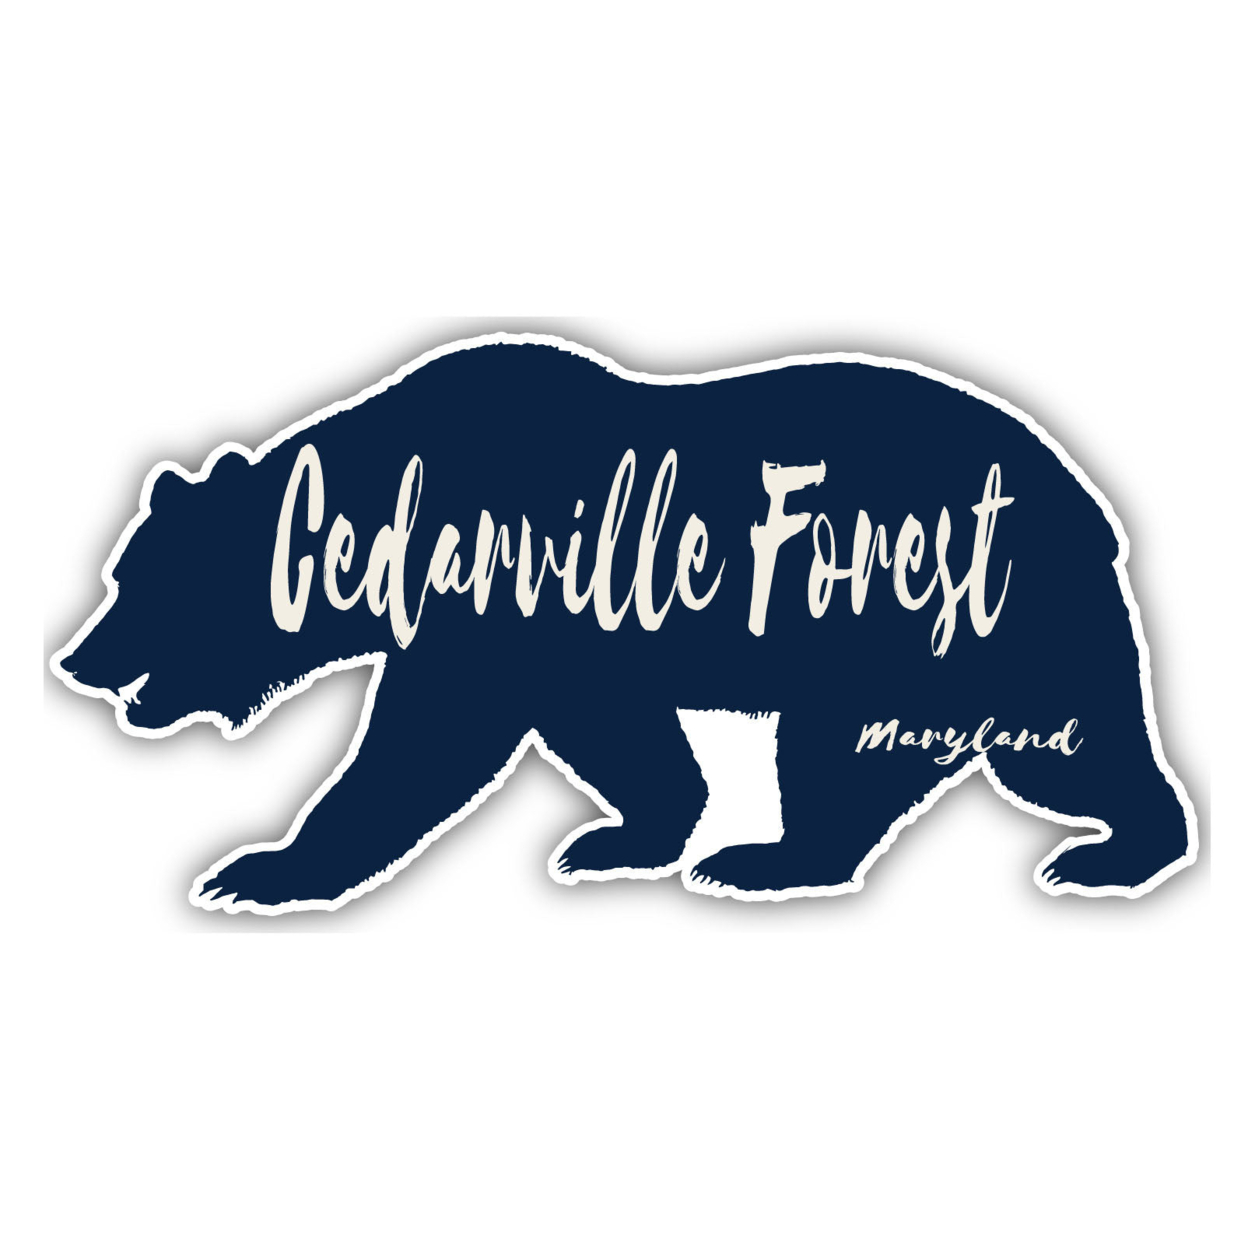 Cedarville Forest Maryland Souvenir Decorative Stickers (Choose Theme And Size) - 4-Pack, 8-Inch, Bear